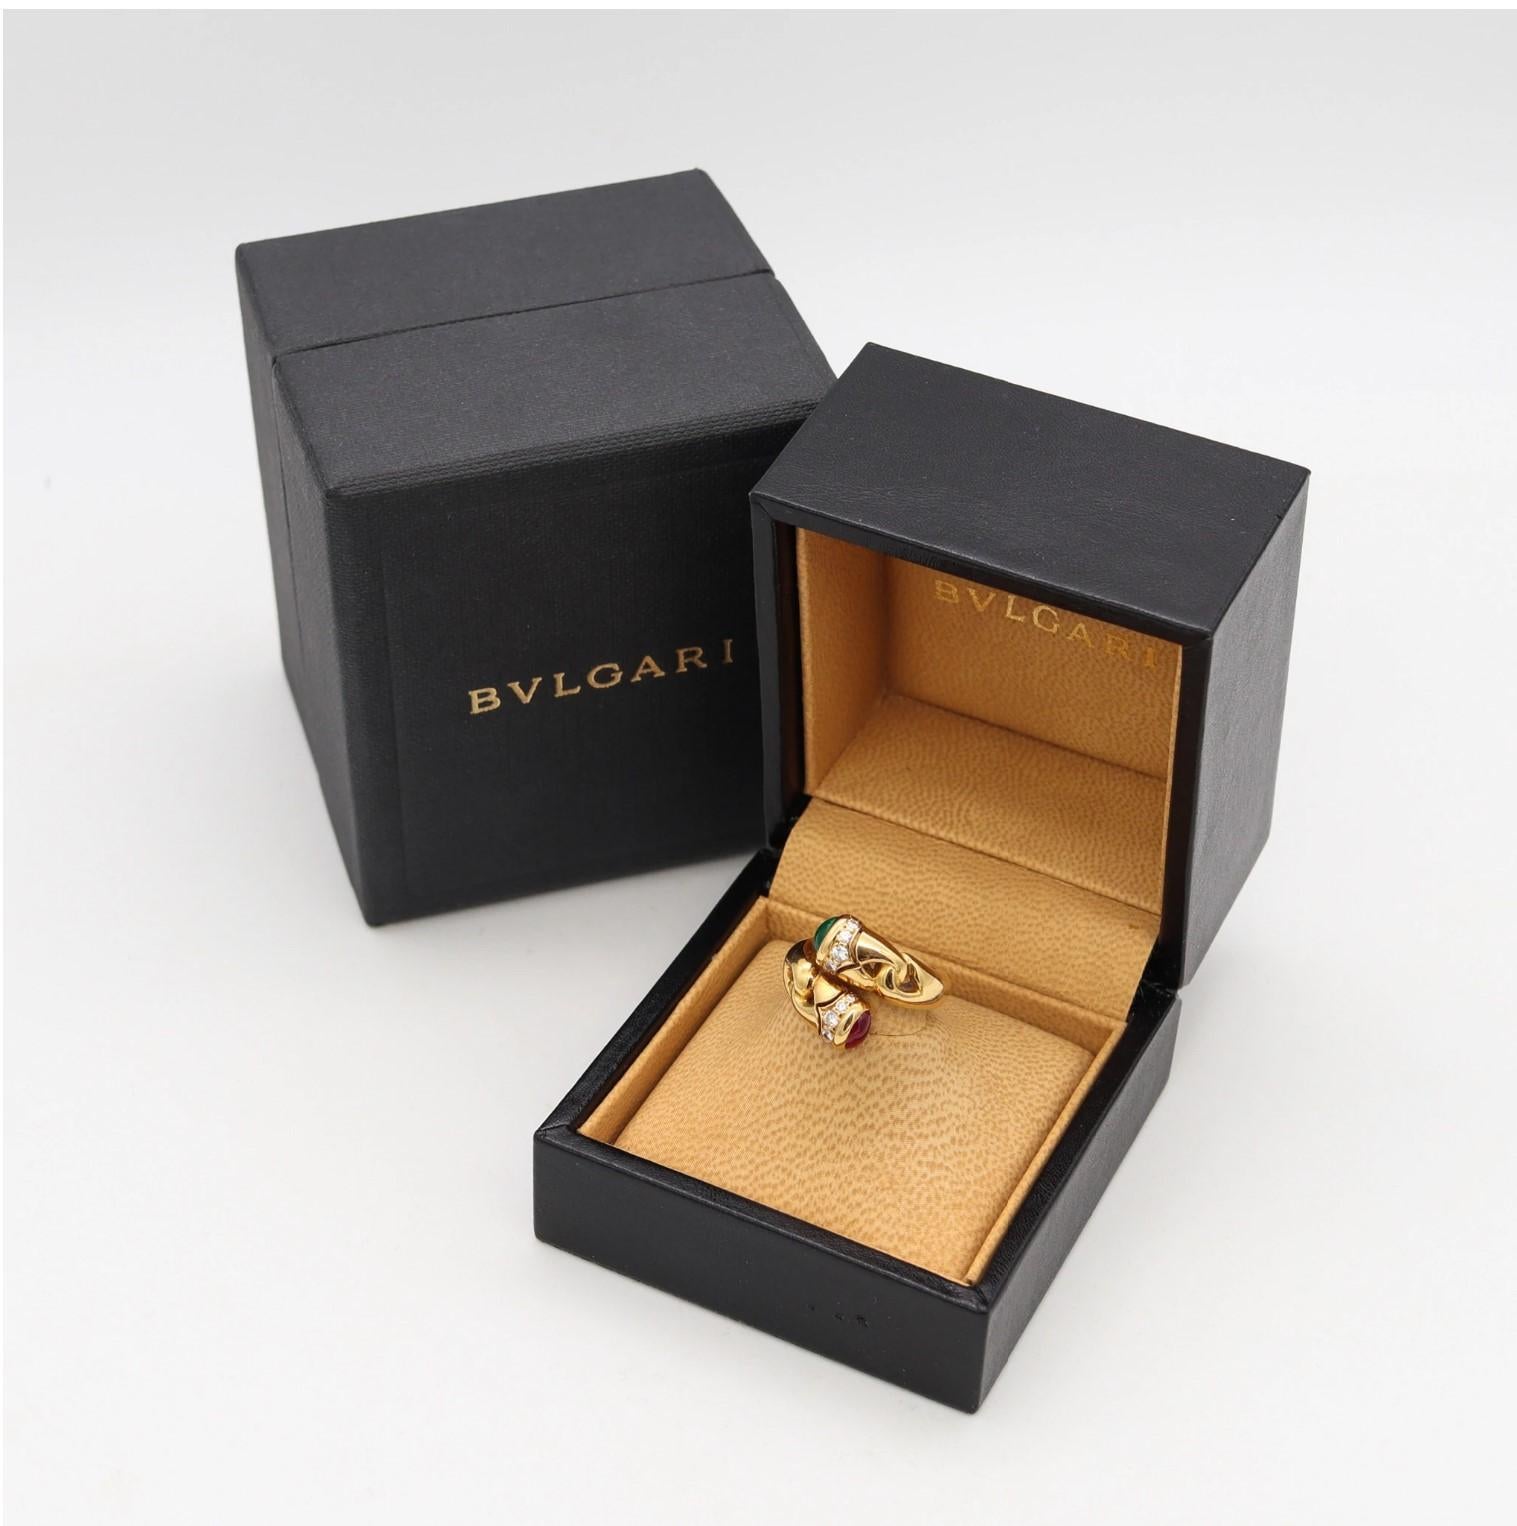 A gem-set bypass ring designed by Bvlgari.

Beautiful piece of jewelry, created in Rome, Italy by the iconic jewelry house of Bvlgari. This rare bypass ring is part of the Bvlgari Prestige Collection and was carefully crafted with great attention to